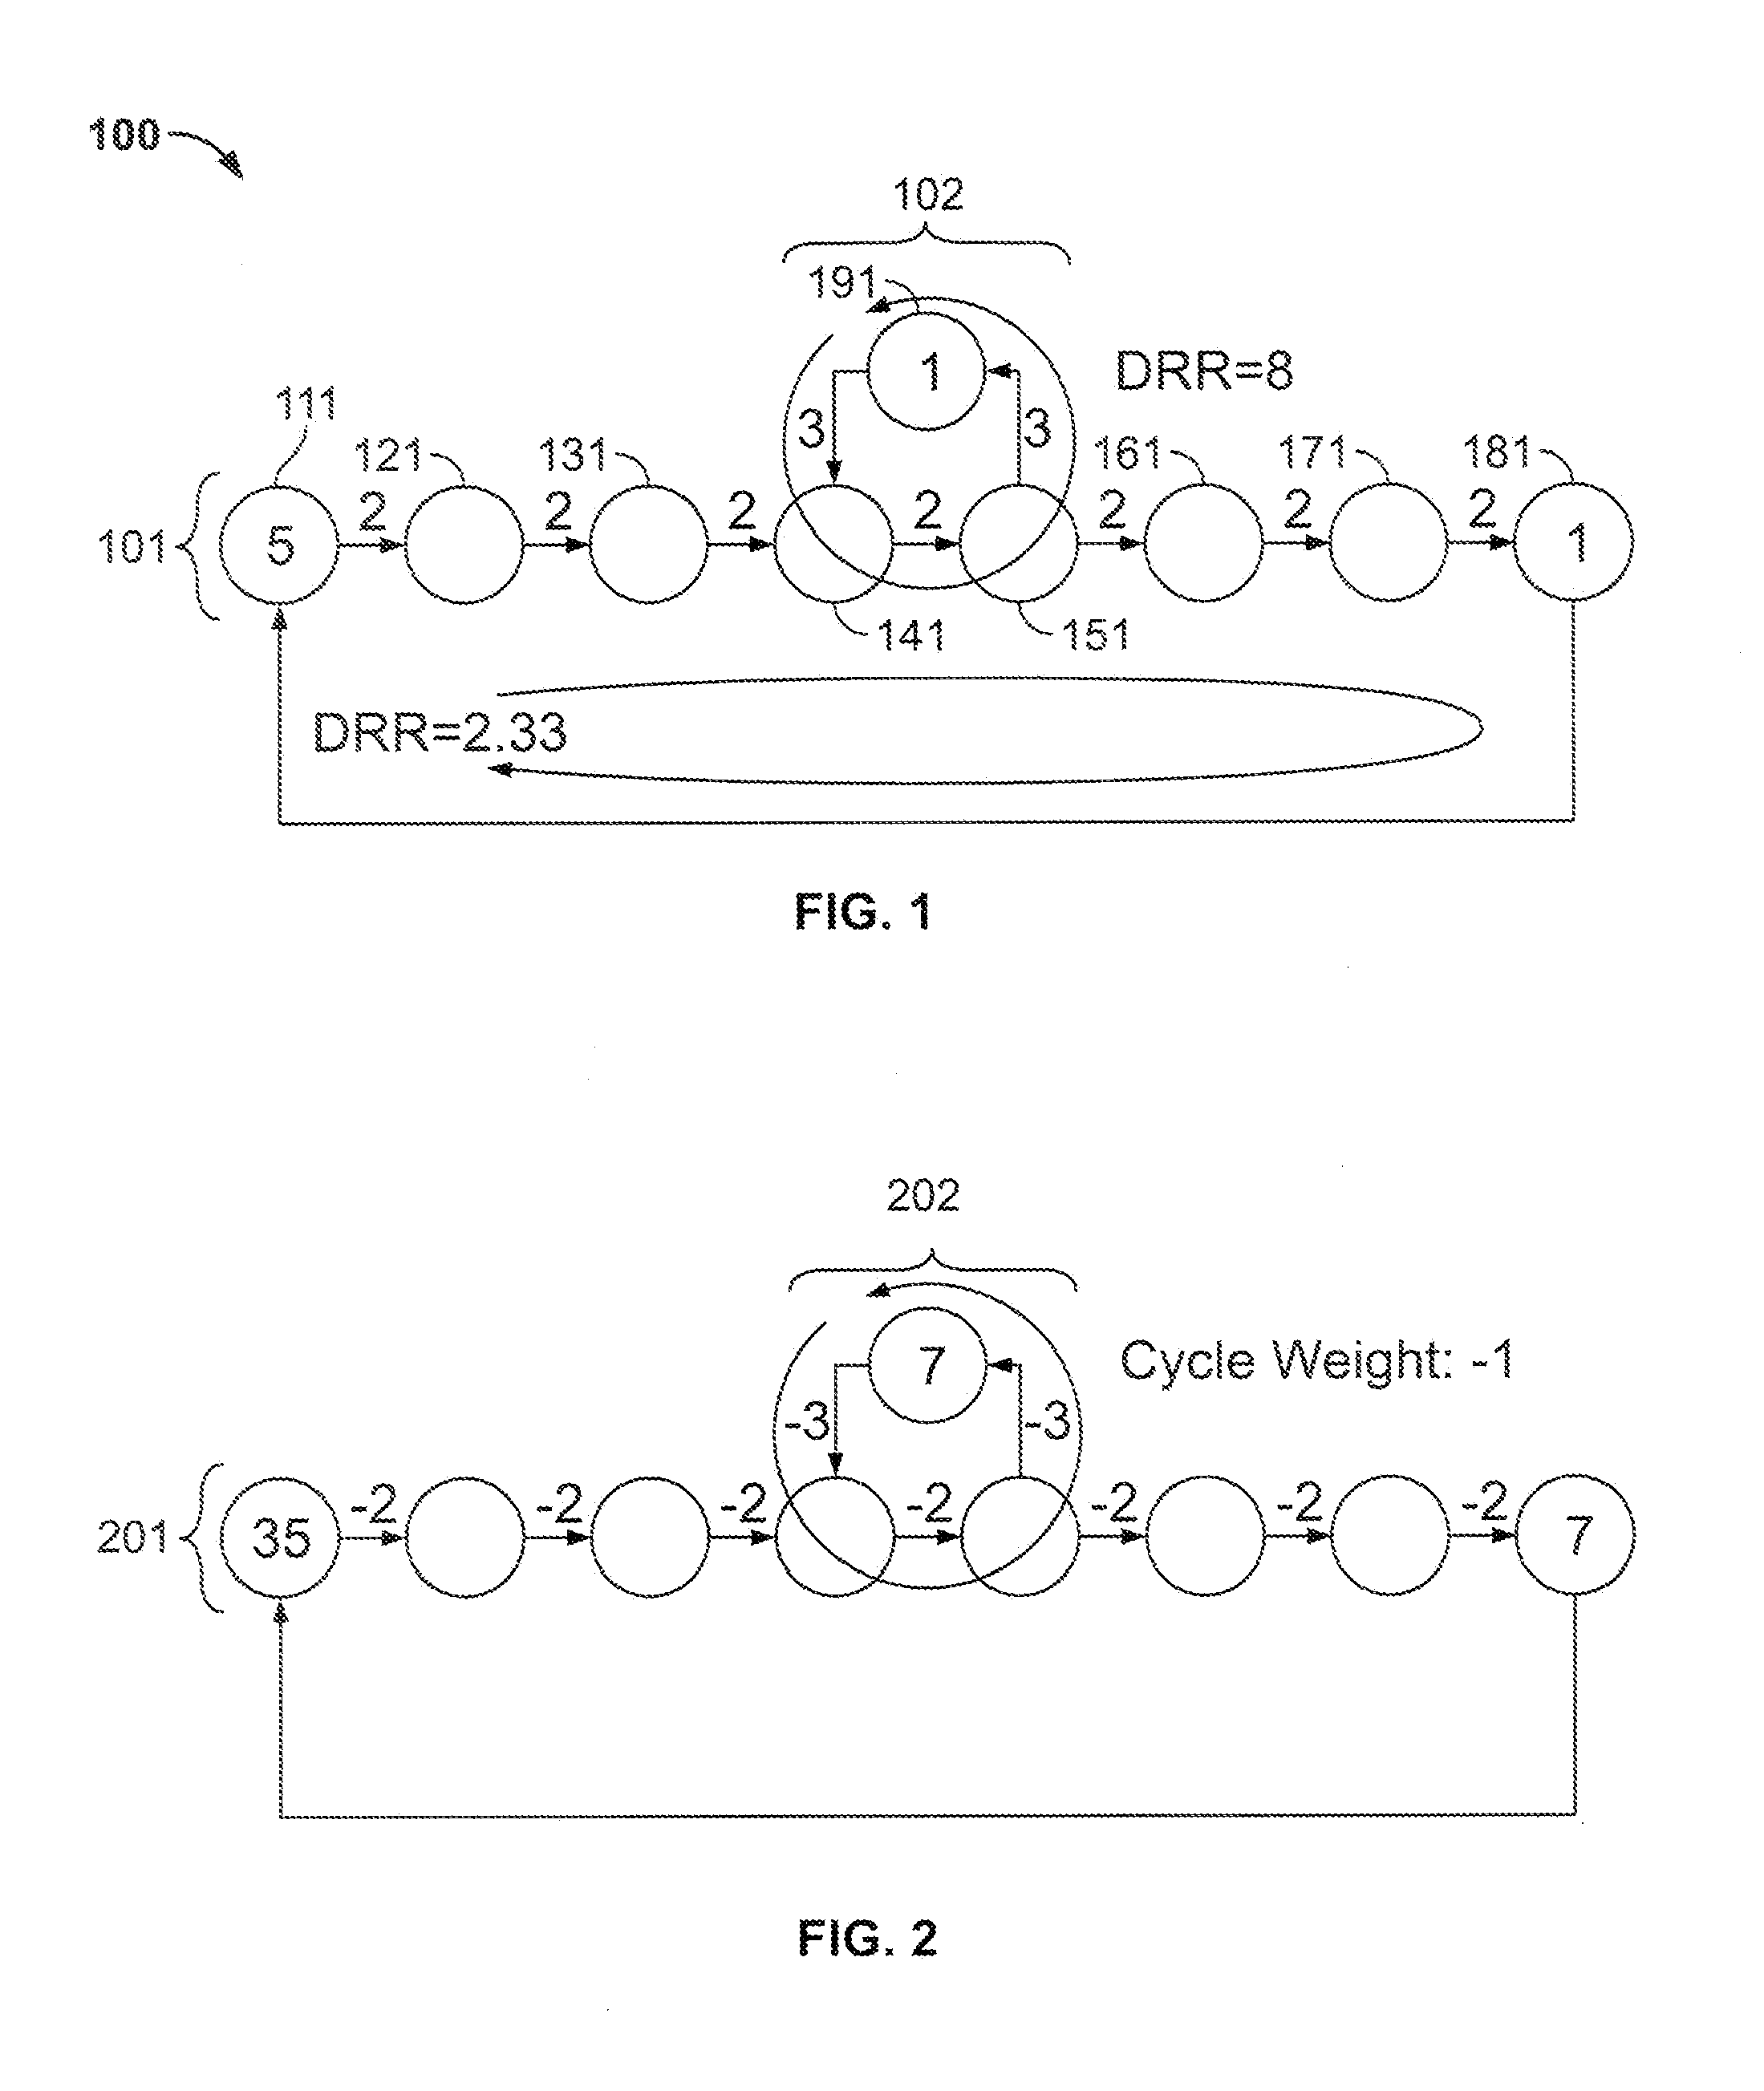 Programmable device configuration methods adapted to account for retiming